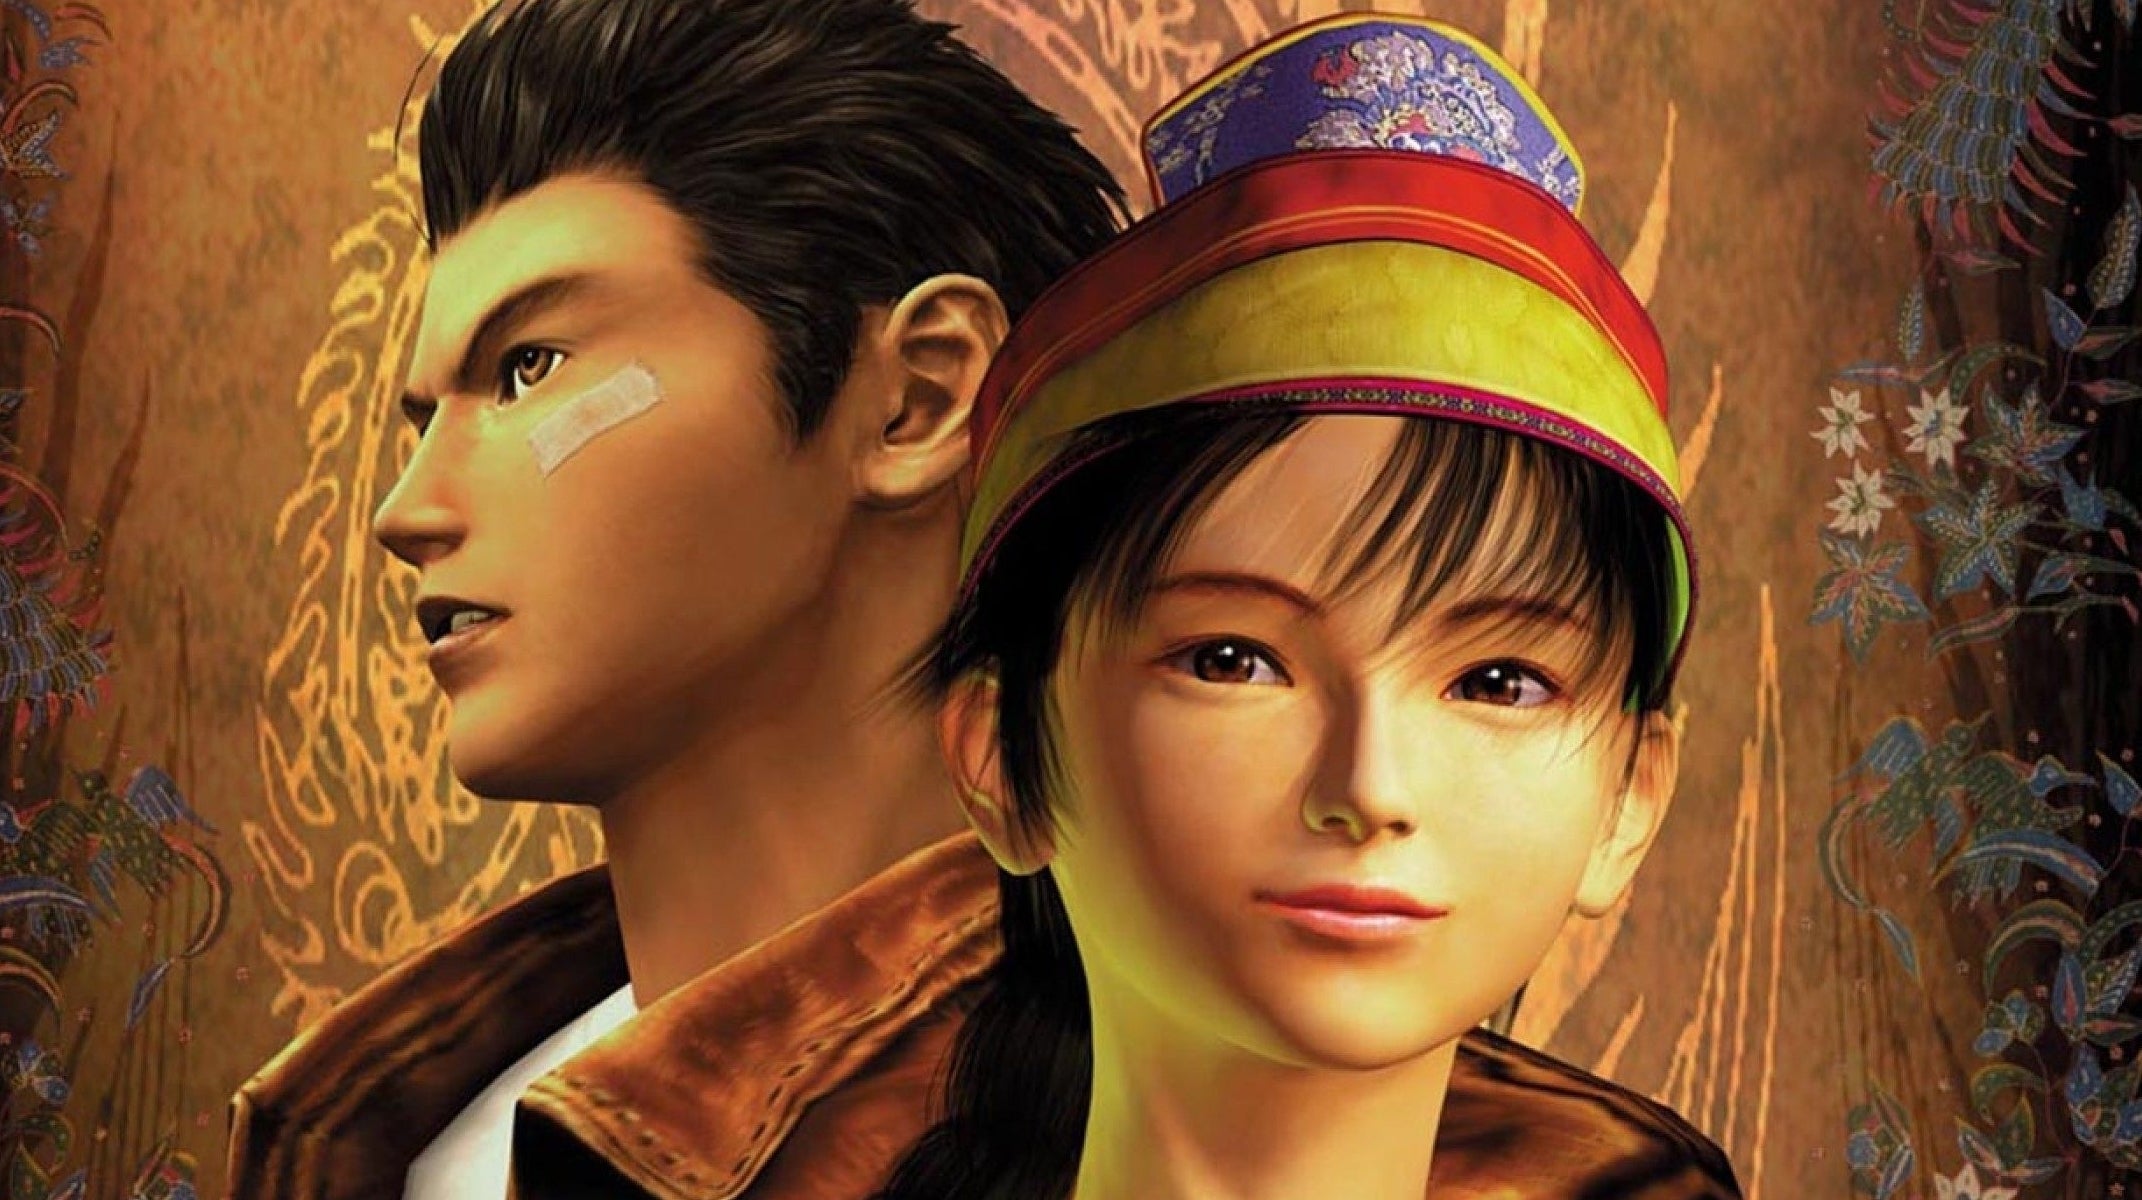 Image for Odklad Shenmue III na listopad